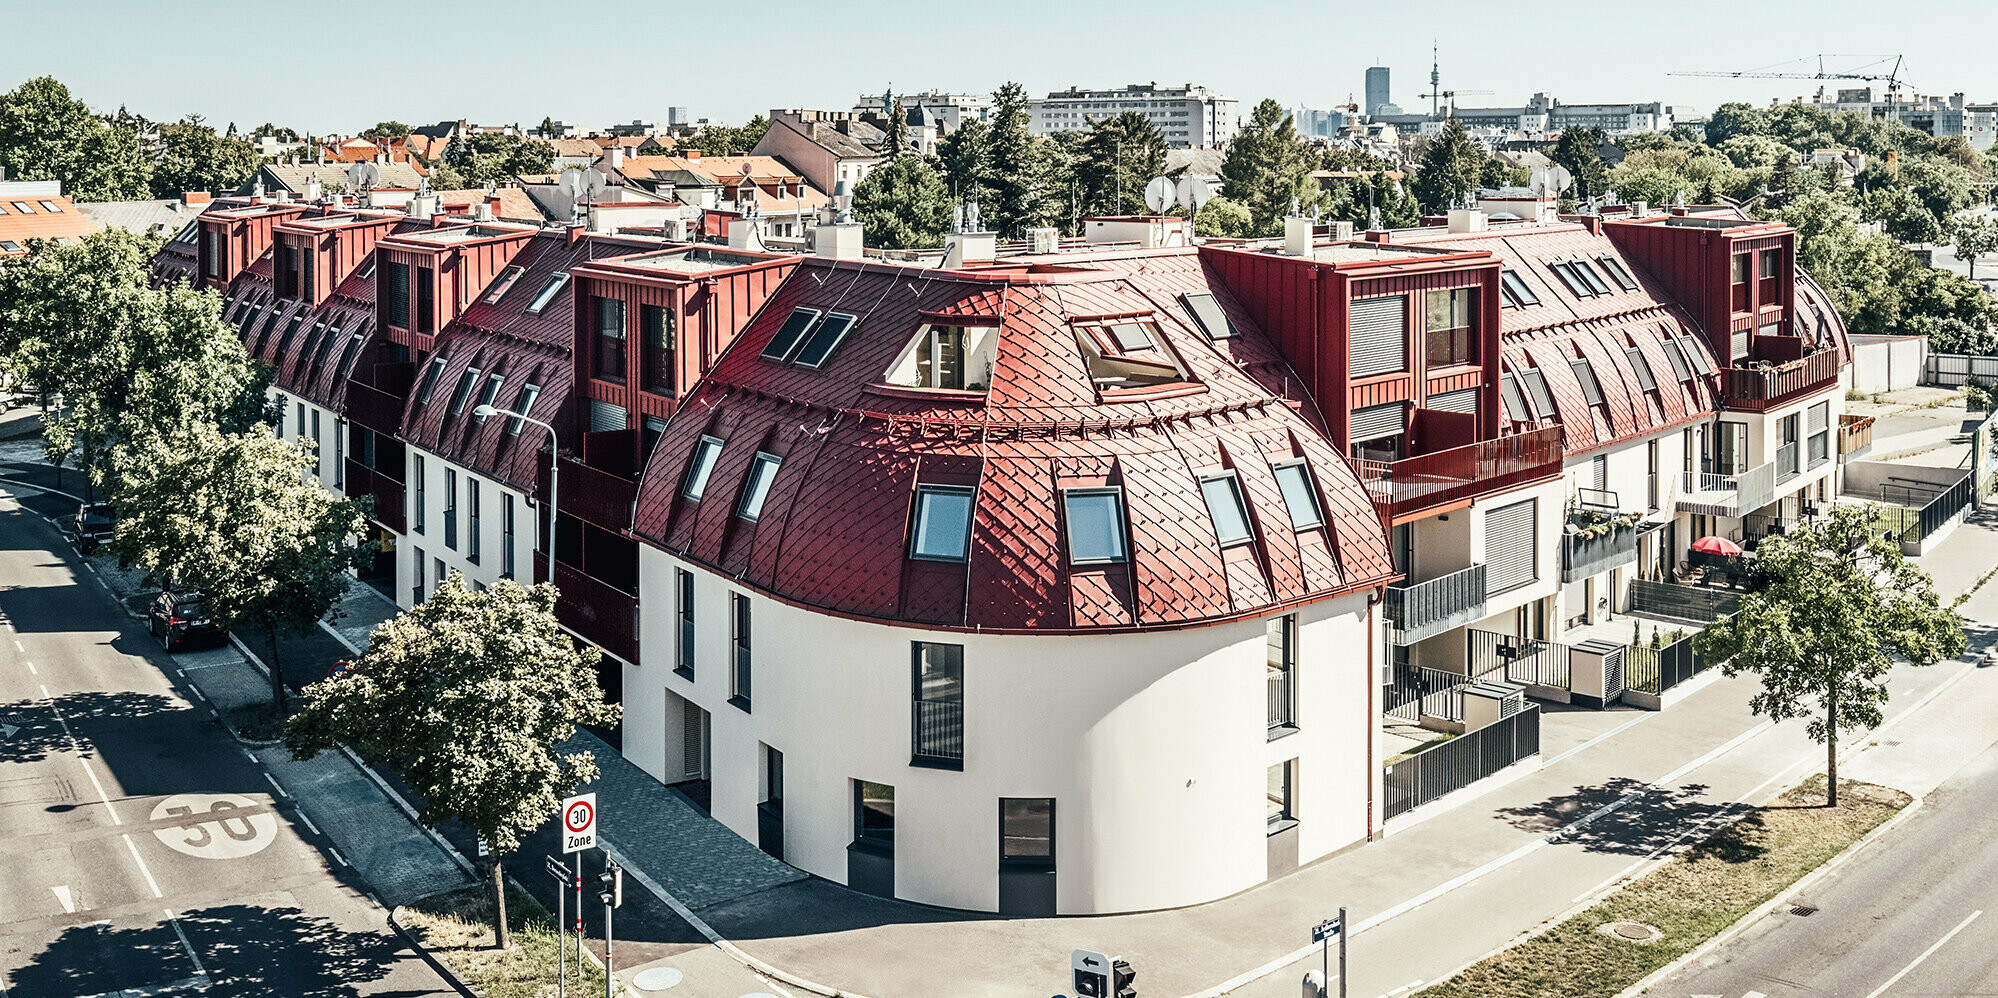 Street view of the residential complex Schöneck 13 with a rounded roofscape, designed by the architectural office schneider+schumacher.